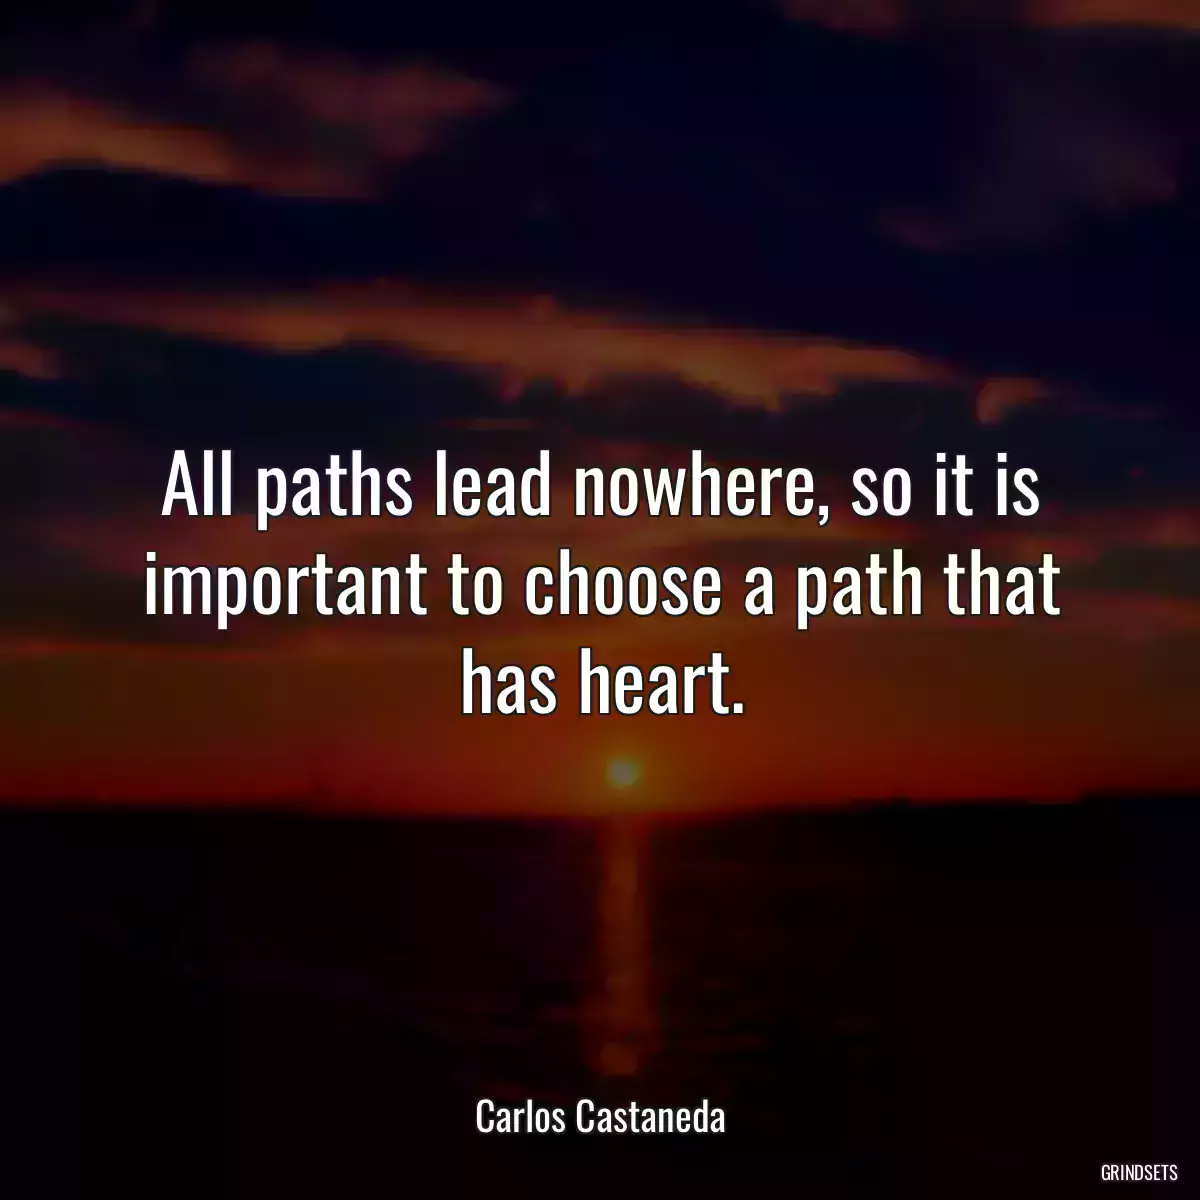 All paths lead nowhere, so it is important to choose a path that has heart.